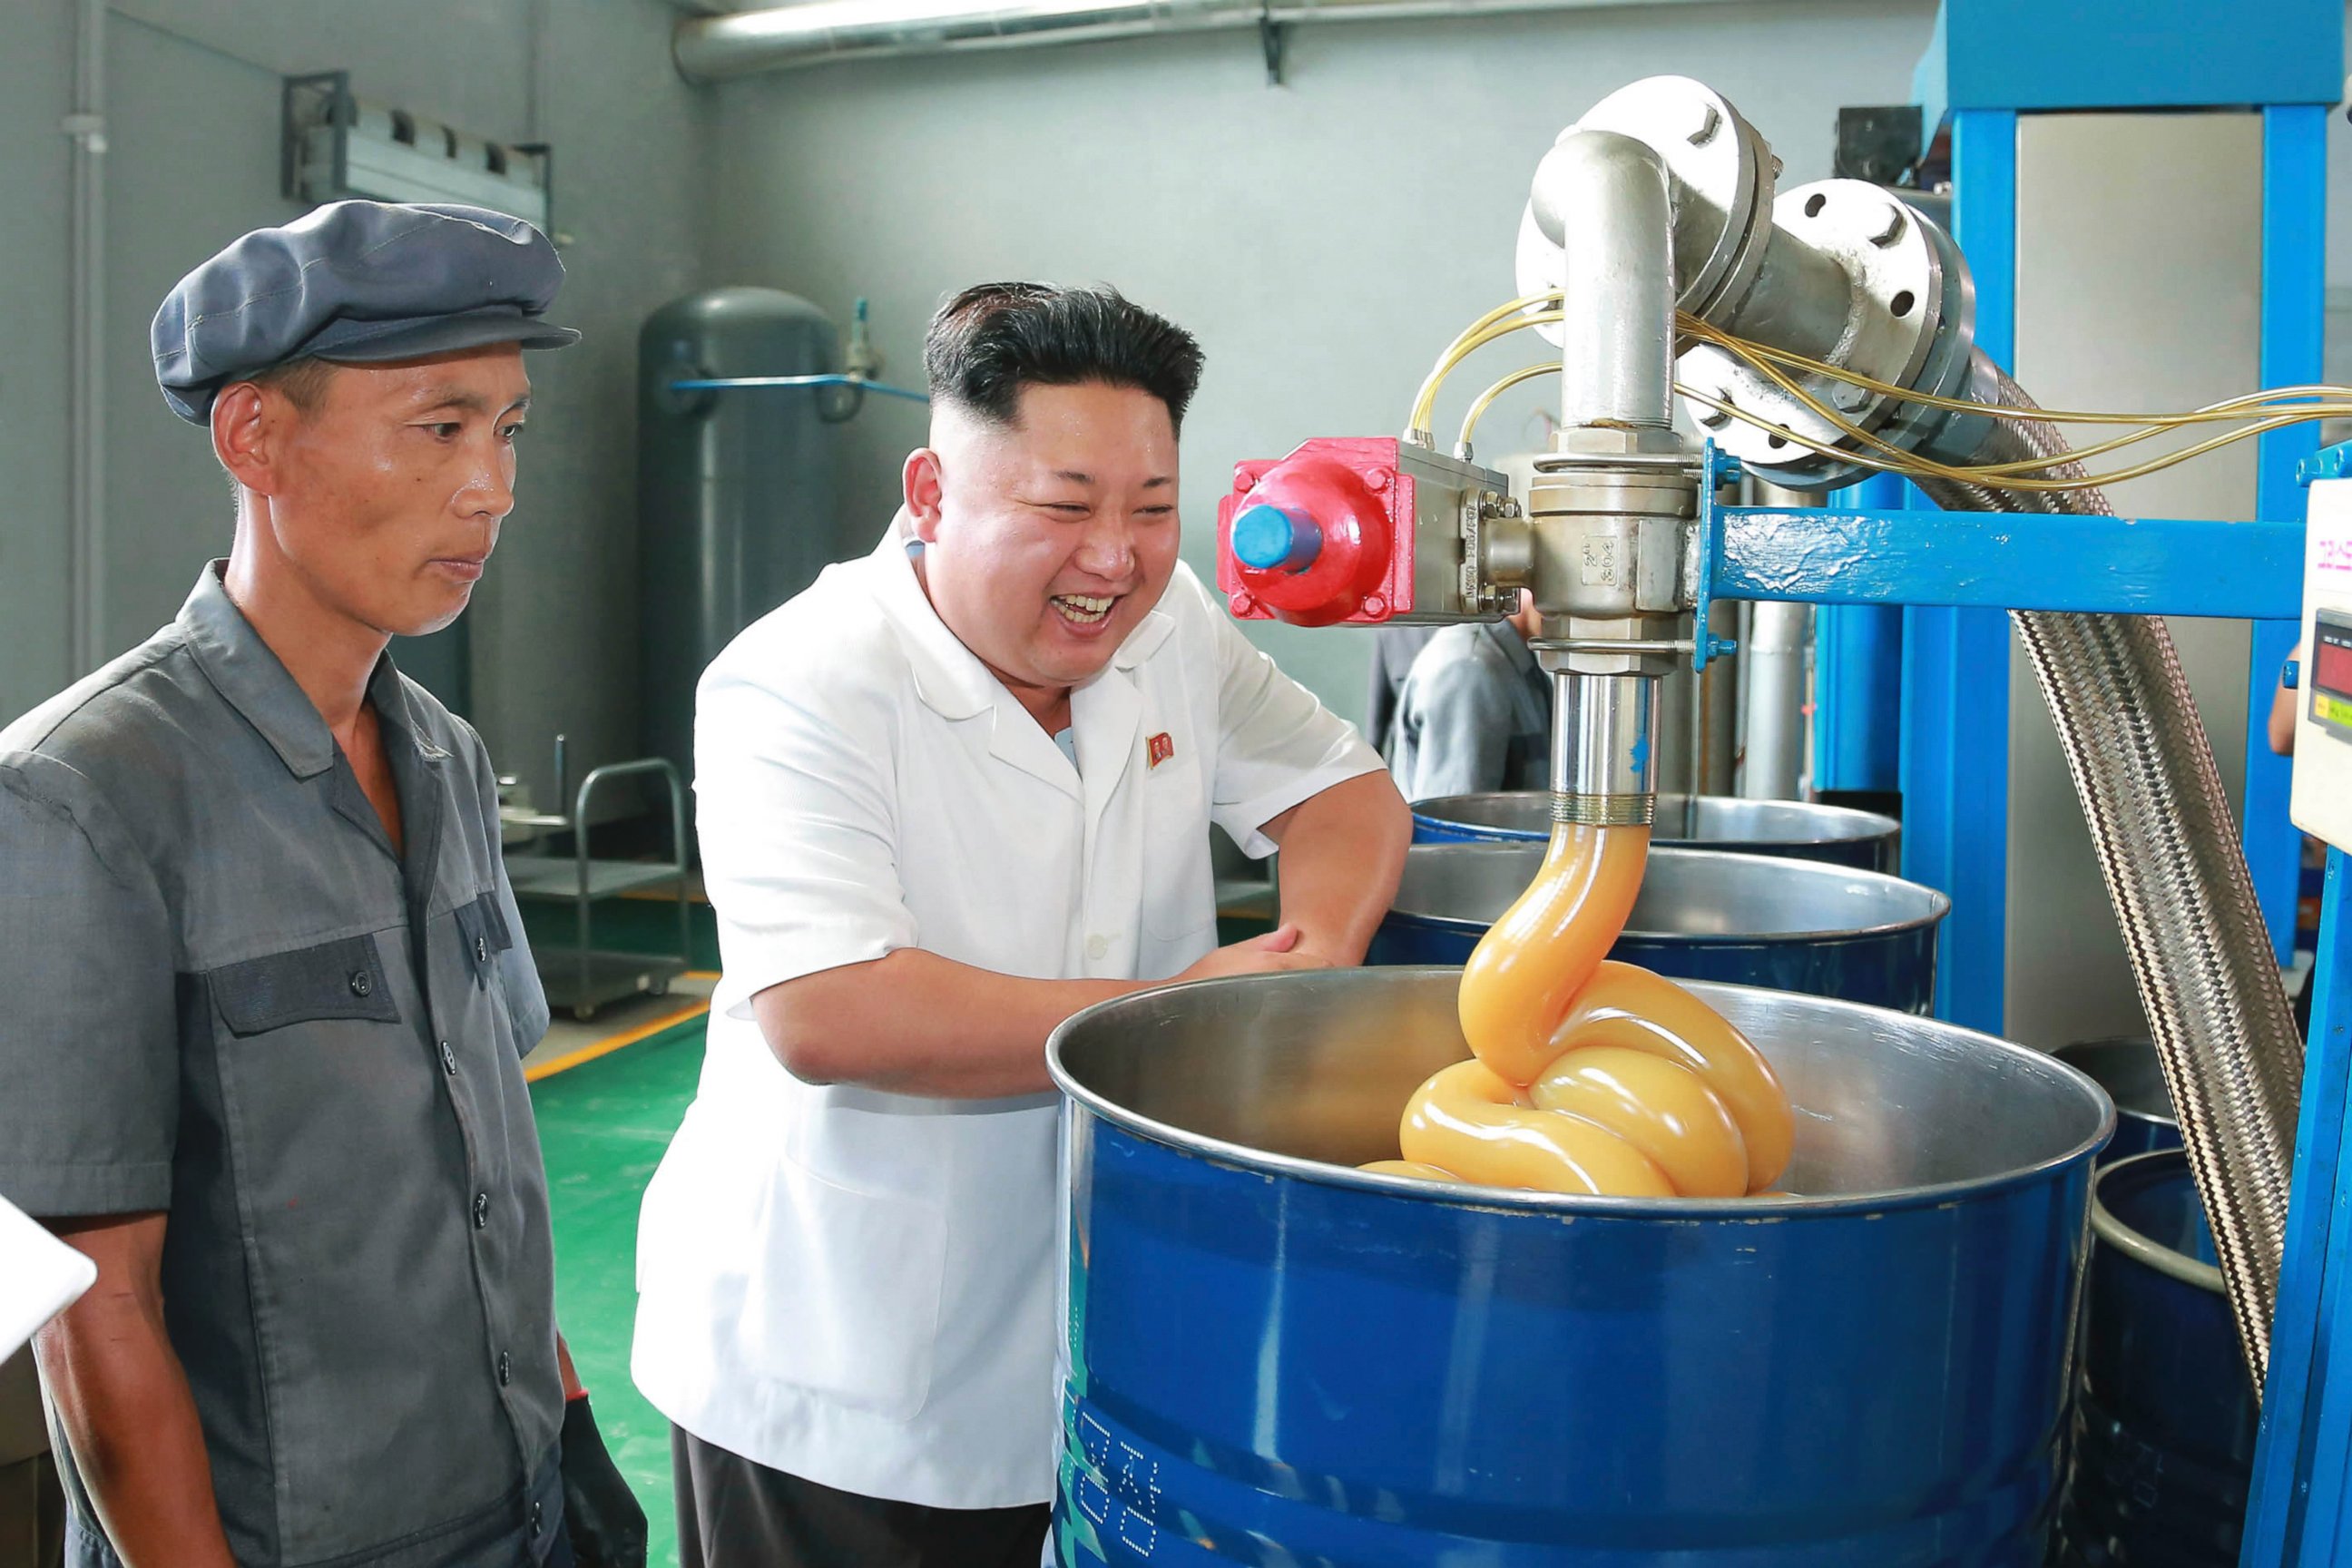 PHOTO: North Korean leader Kim Jong Un smiles during a visit to the Chonji Lubricant Factory, in this undated photo released by North Korea's Korean Central News Agency (KCNA) in Pyongyang in this Aug. 6, 2014, file photo.
